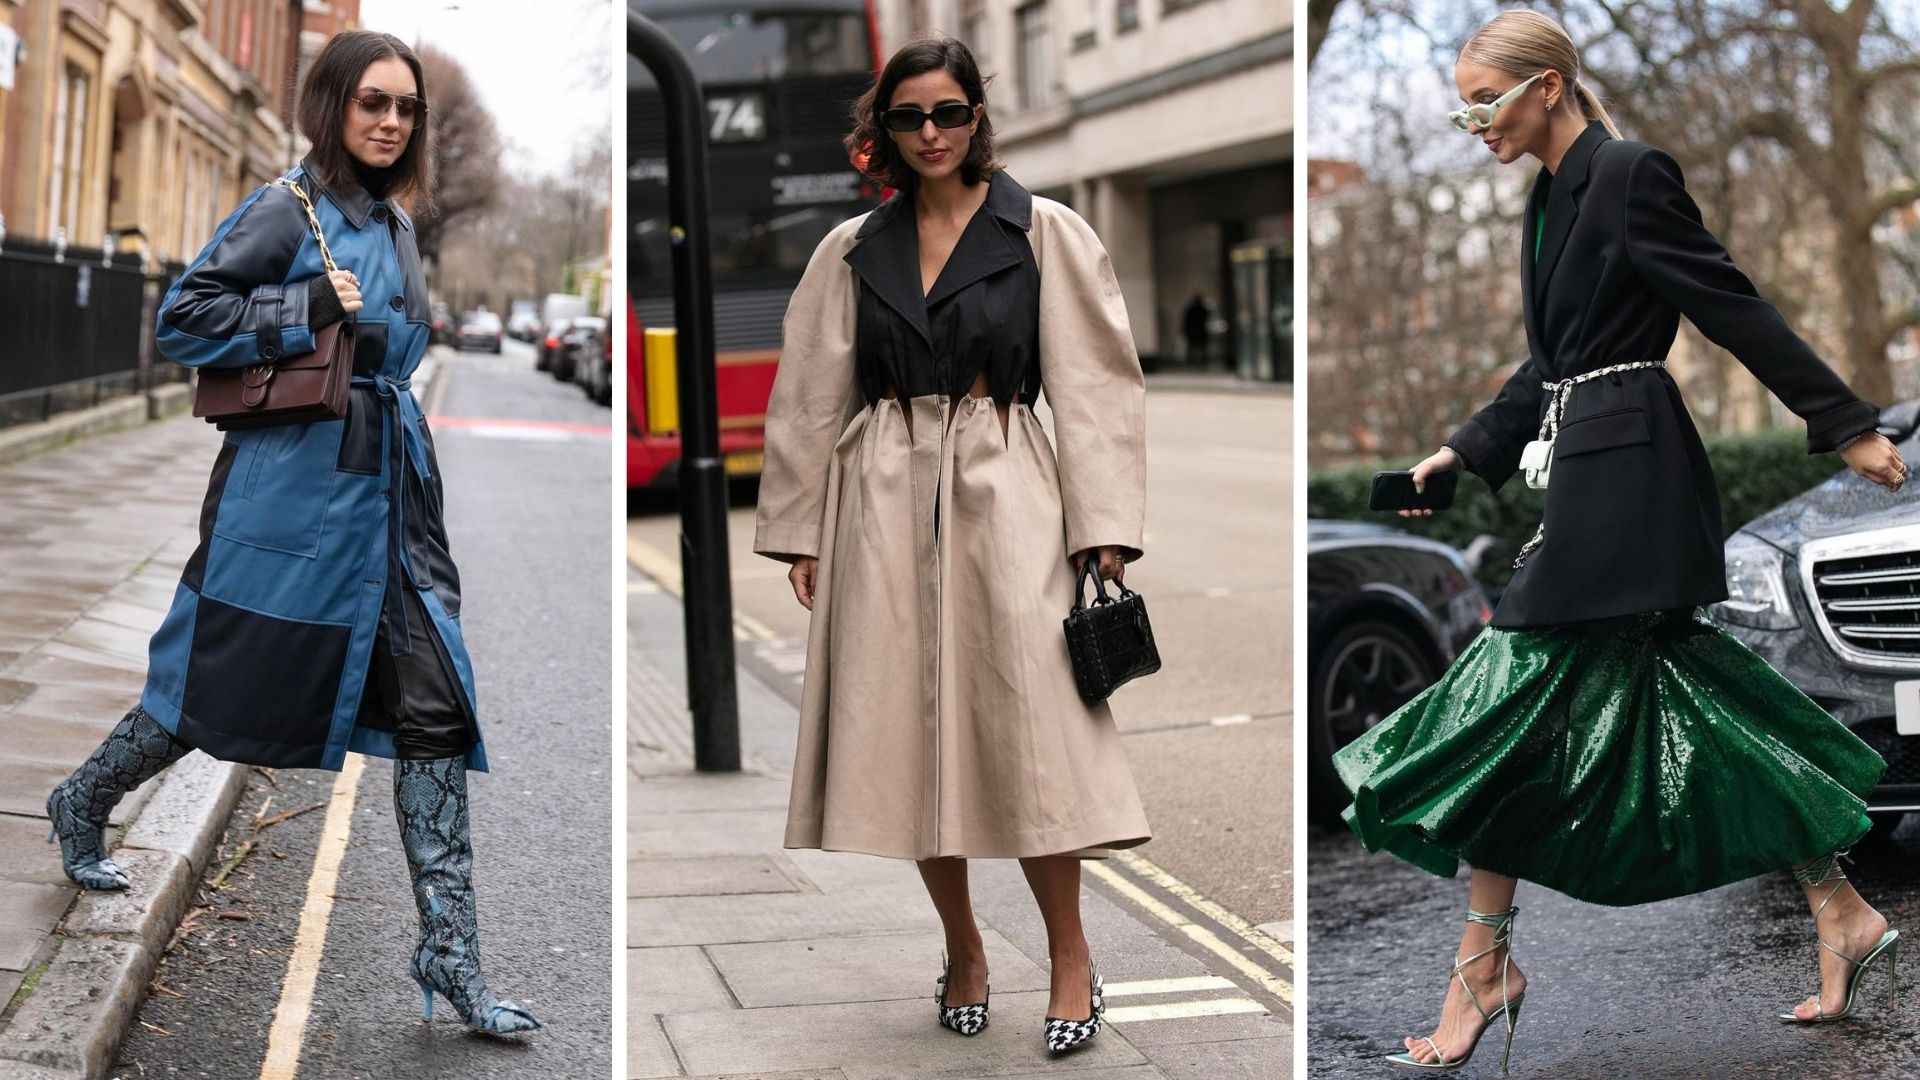 London Fashion Week Street Style That Will Make Your Head Turn